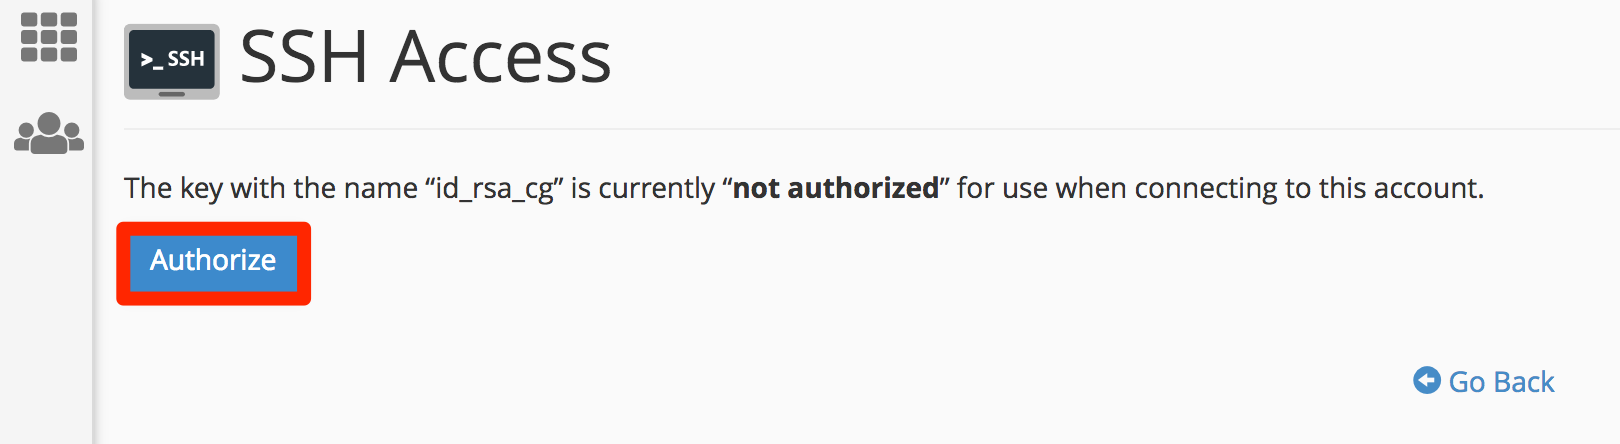 authorize.png